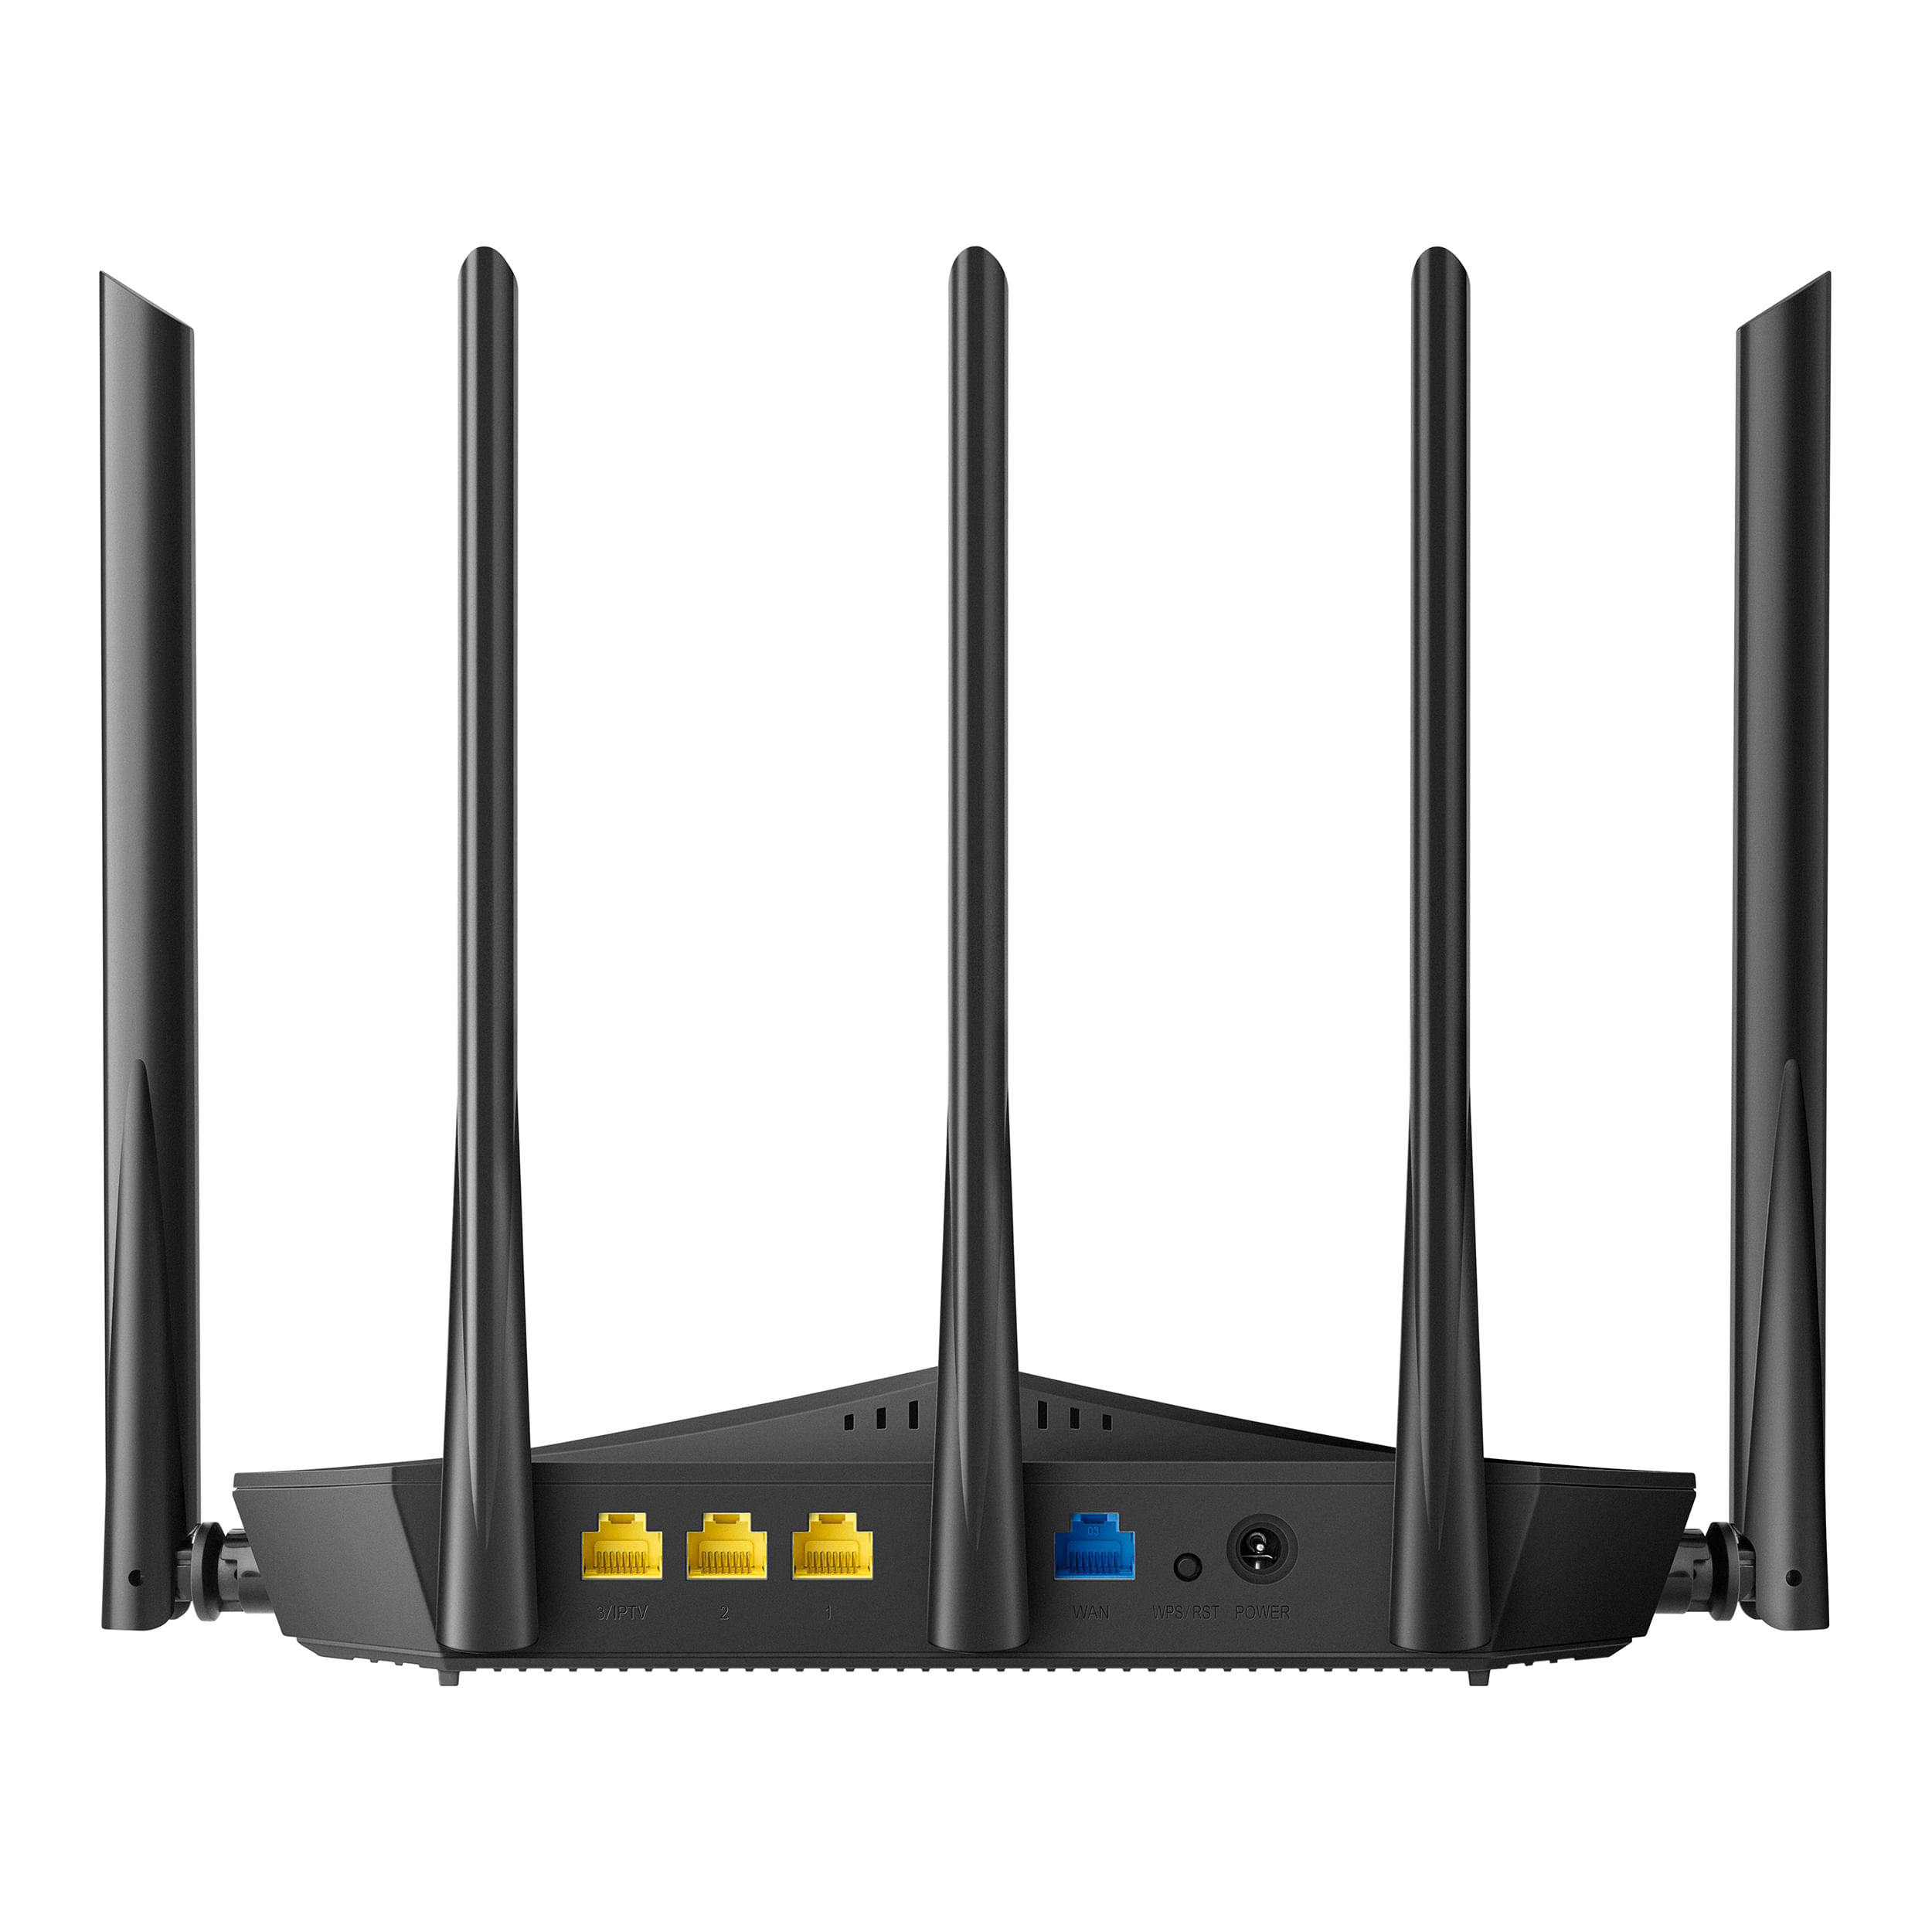 Repetidor / Router Wi-Fi 6 AX1500 2,4 GHz y 5 GHz, hast